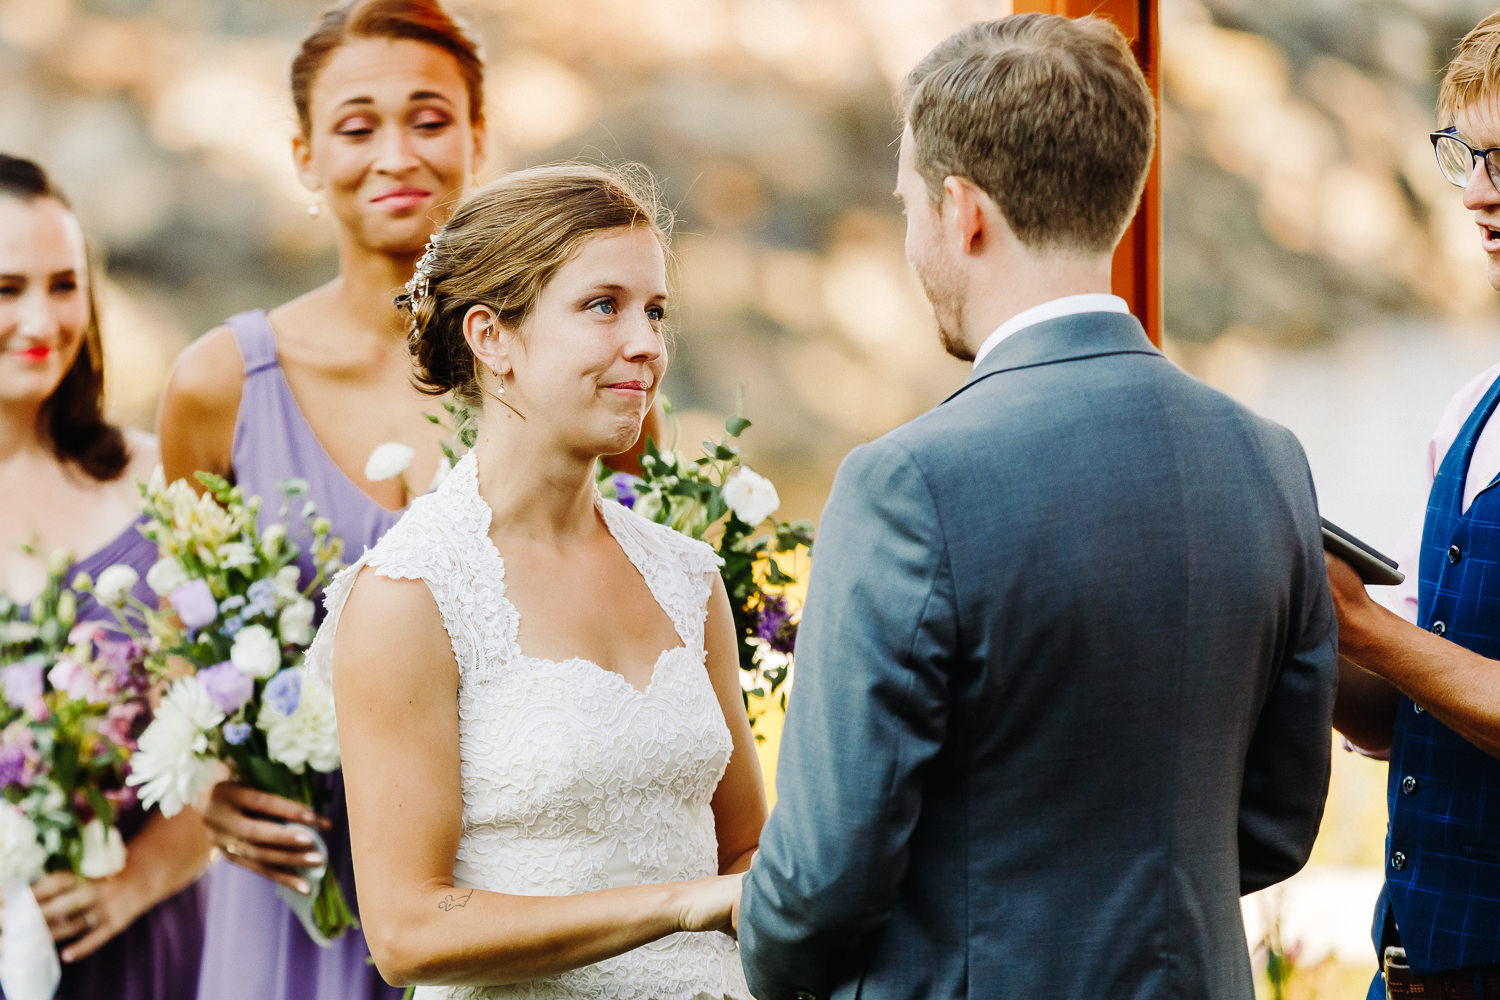 Bride smiling at groom during vows